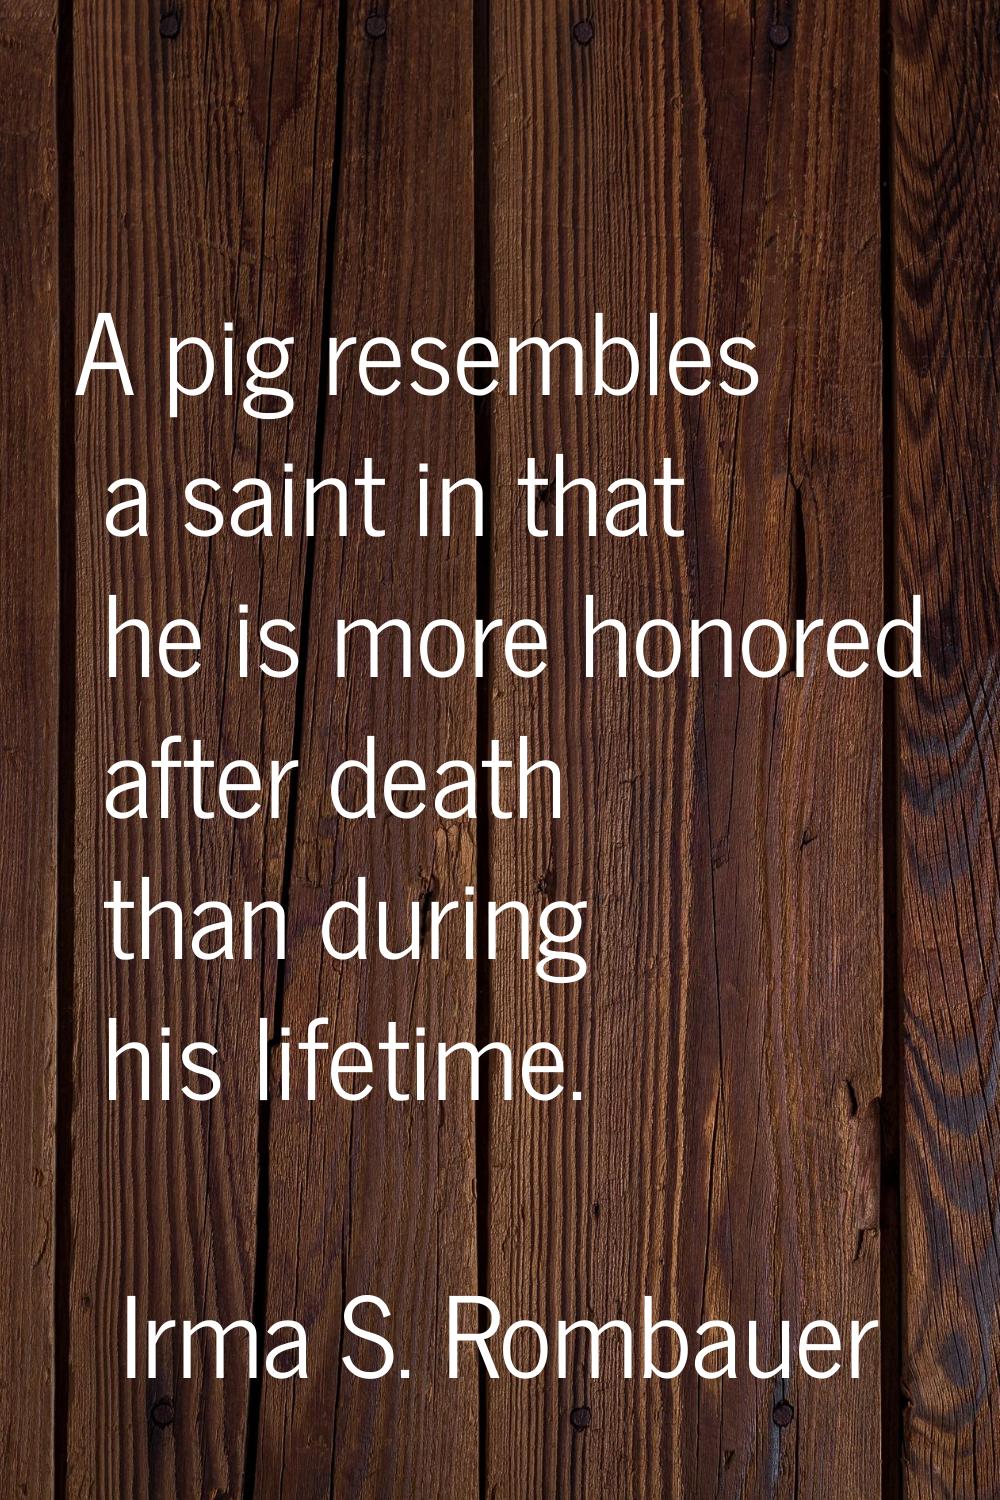 A pig resembles a saint in that he is more honored after death than during his lifetime.